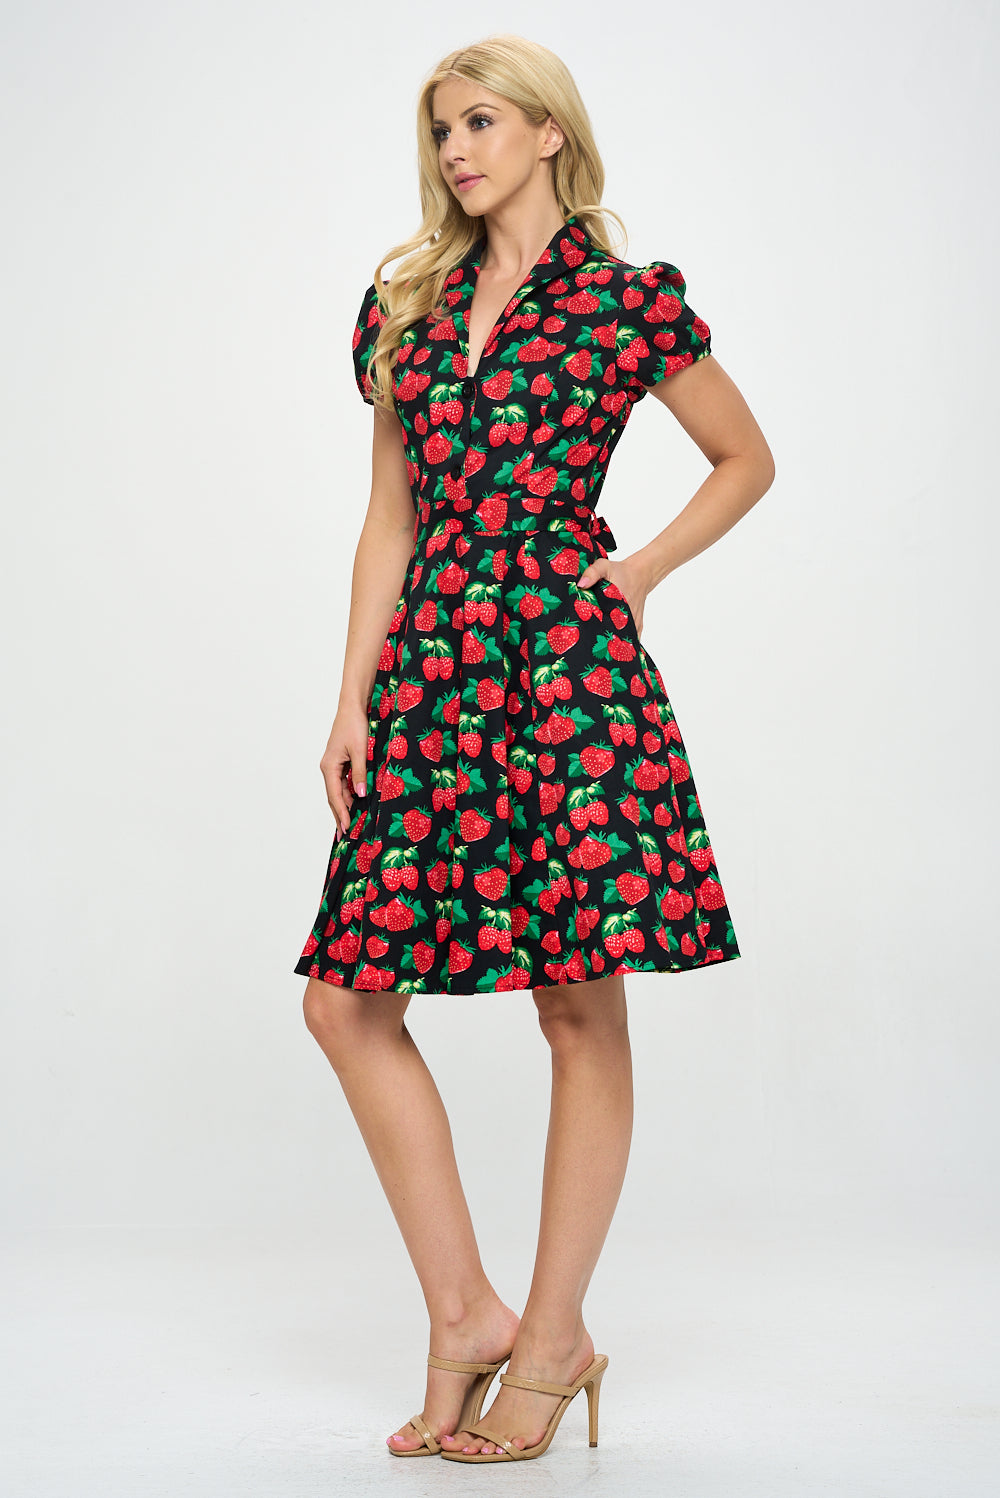 Retro Strawberry Fit and Flare Dress- Plus Size